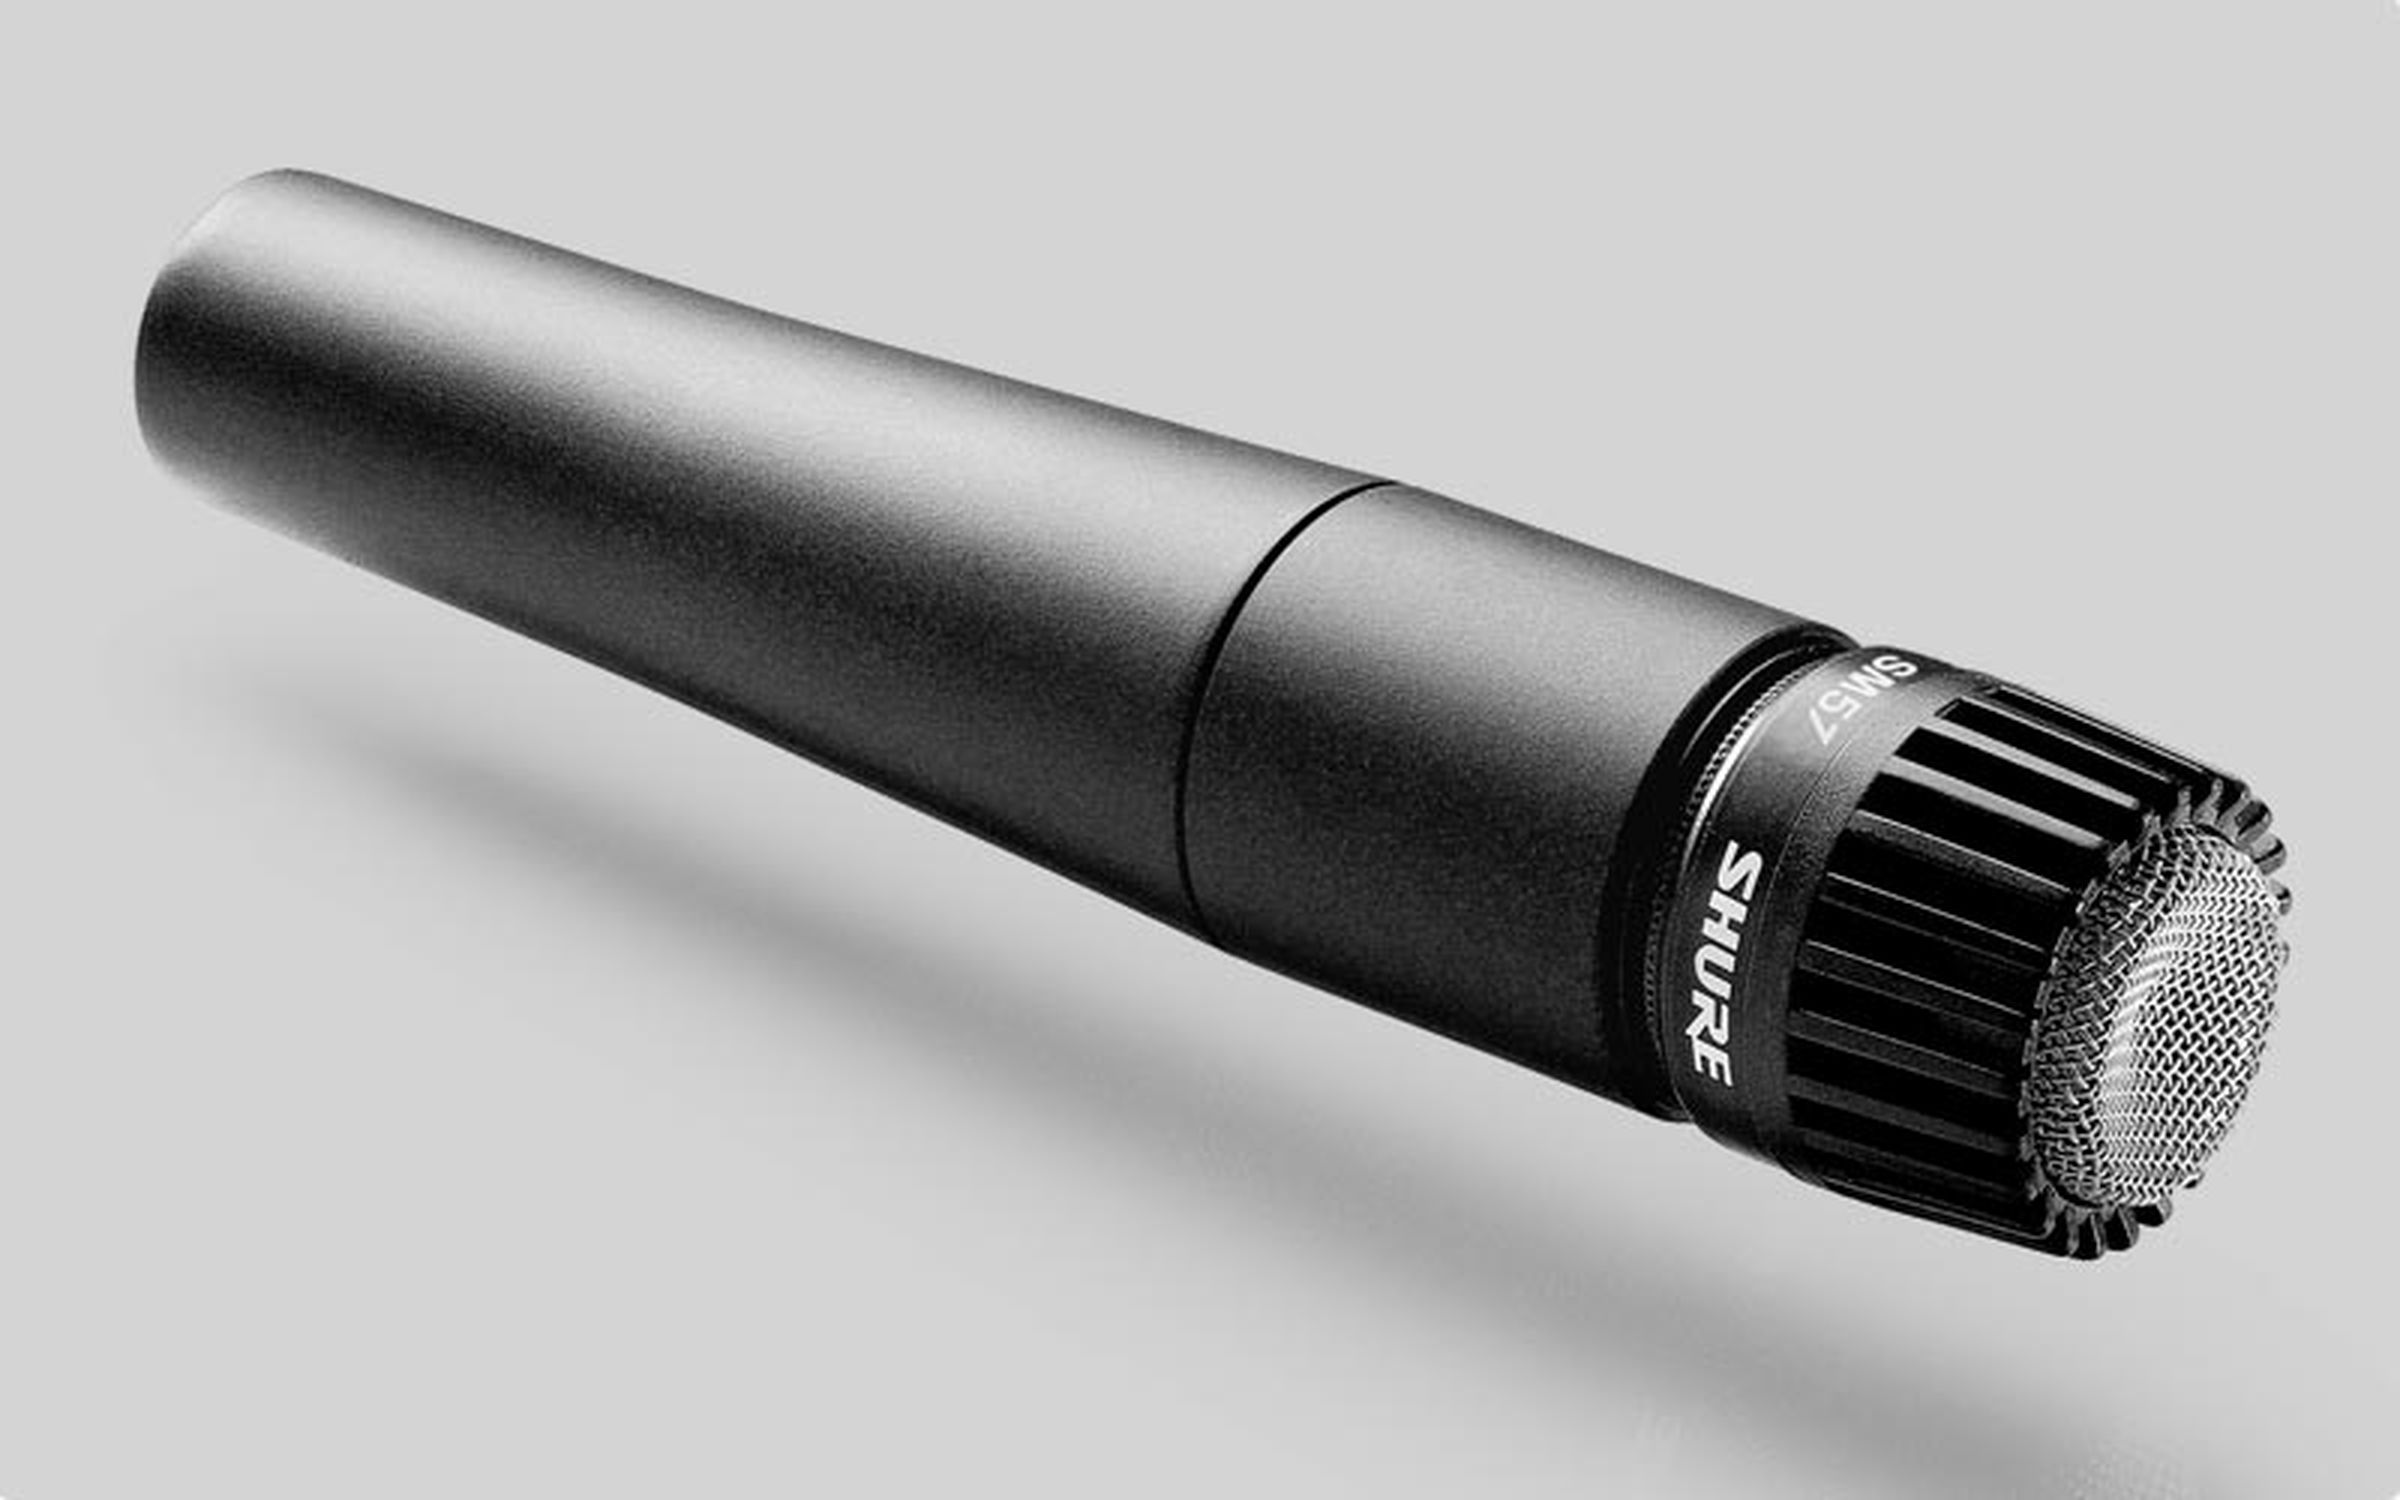 The Shure SM57 microphone